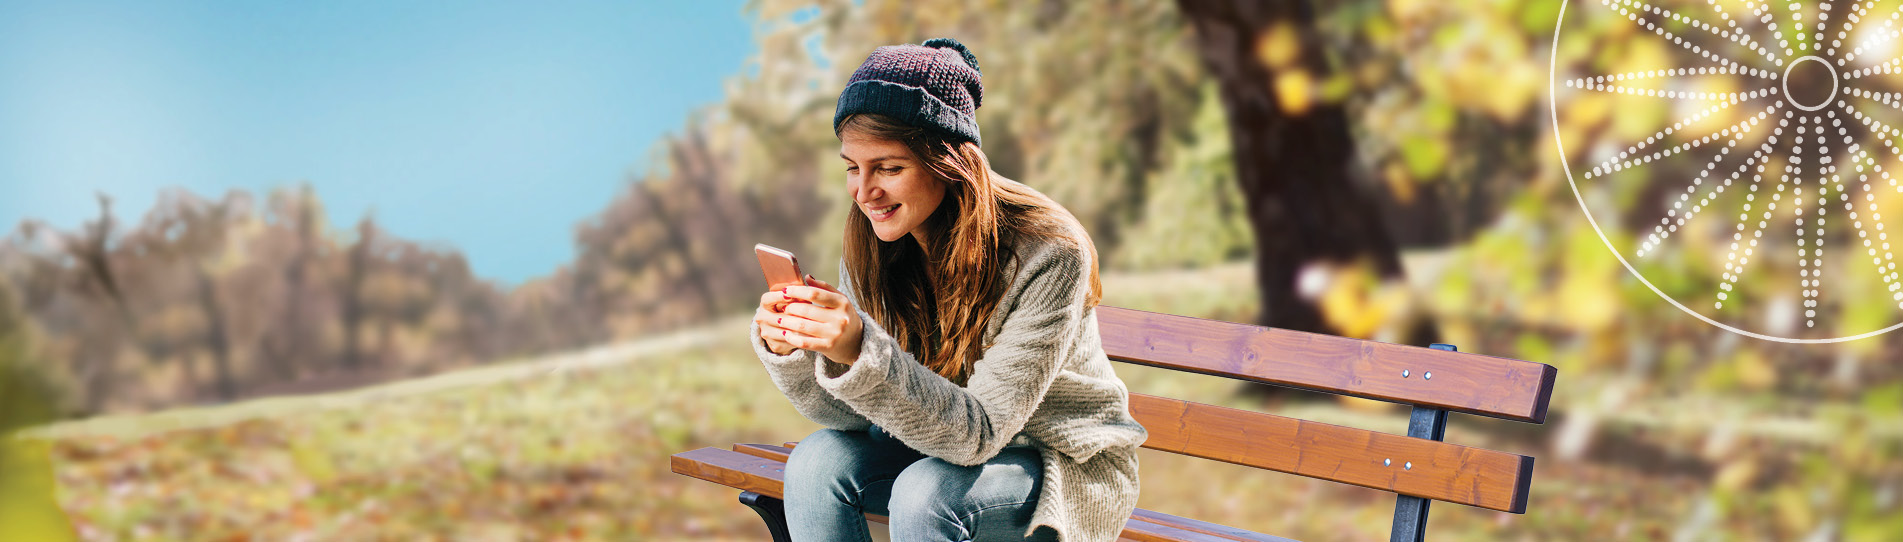 young woman sitting on a park bench looking at her phone